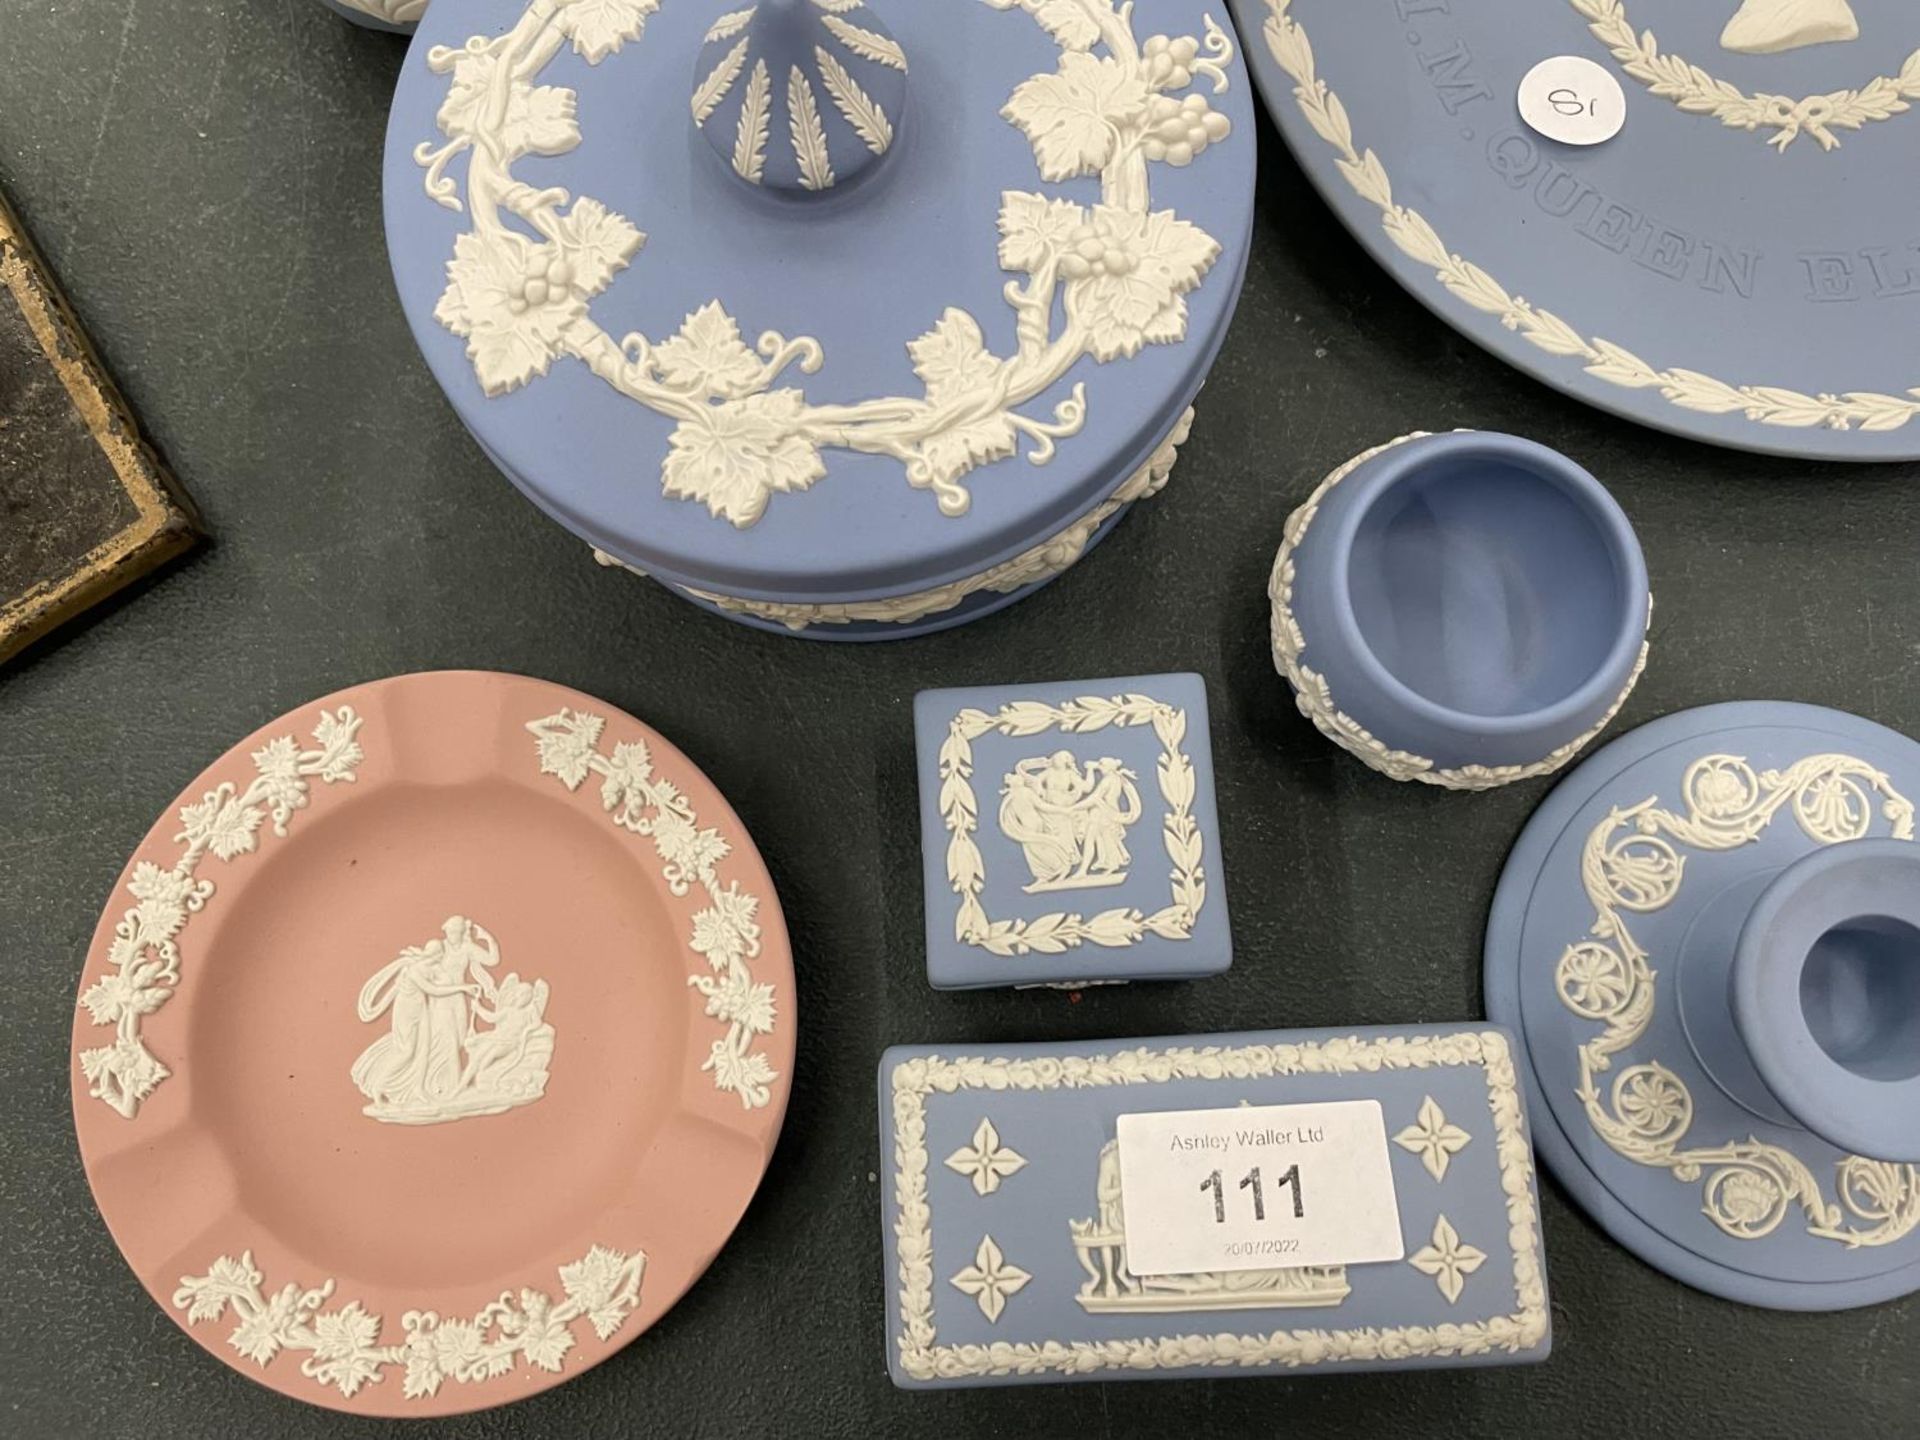 A QAUNTITY OF WEDGWOOD JASPERWARE TO INCLUDE PLATES, TRINKET BOXES, VASES, ETC, INCLUDES ONE PIECE - Image 2 of 5